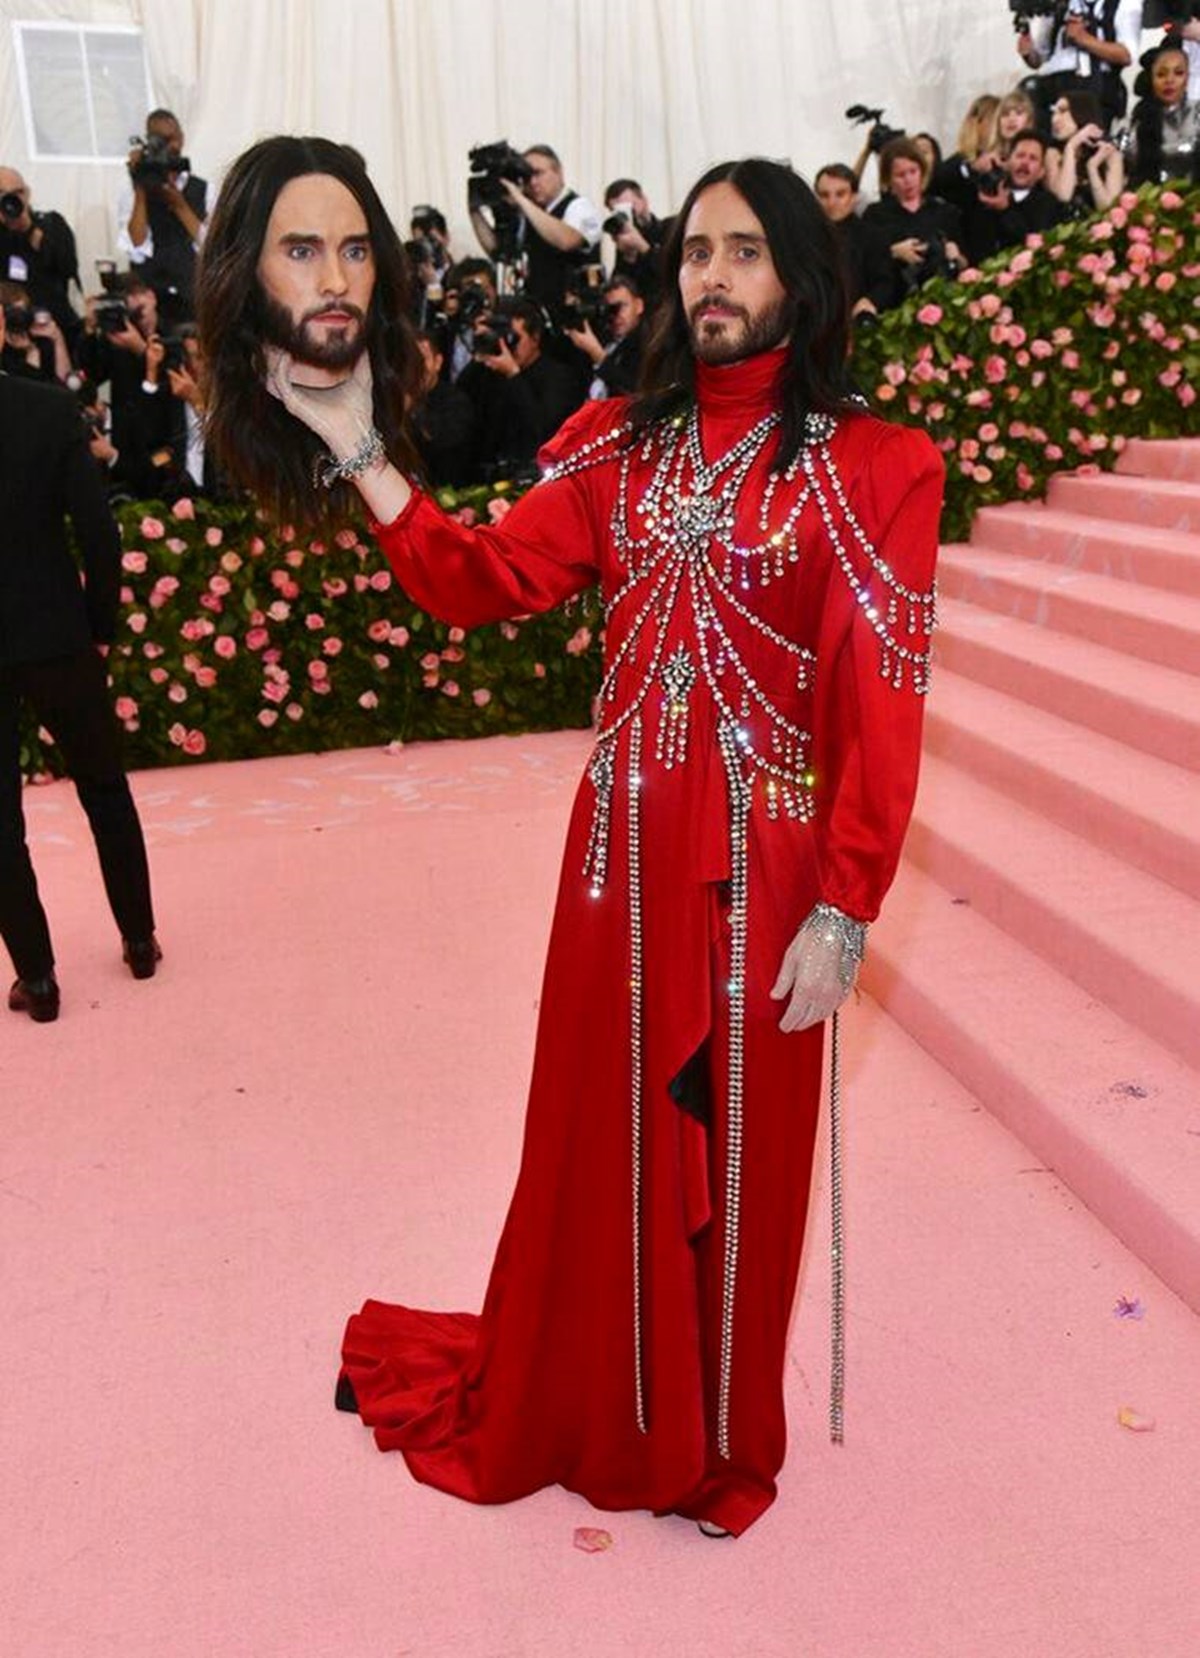 Ahead of Met Gala 2023, a look back at the weirdest fashion moments